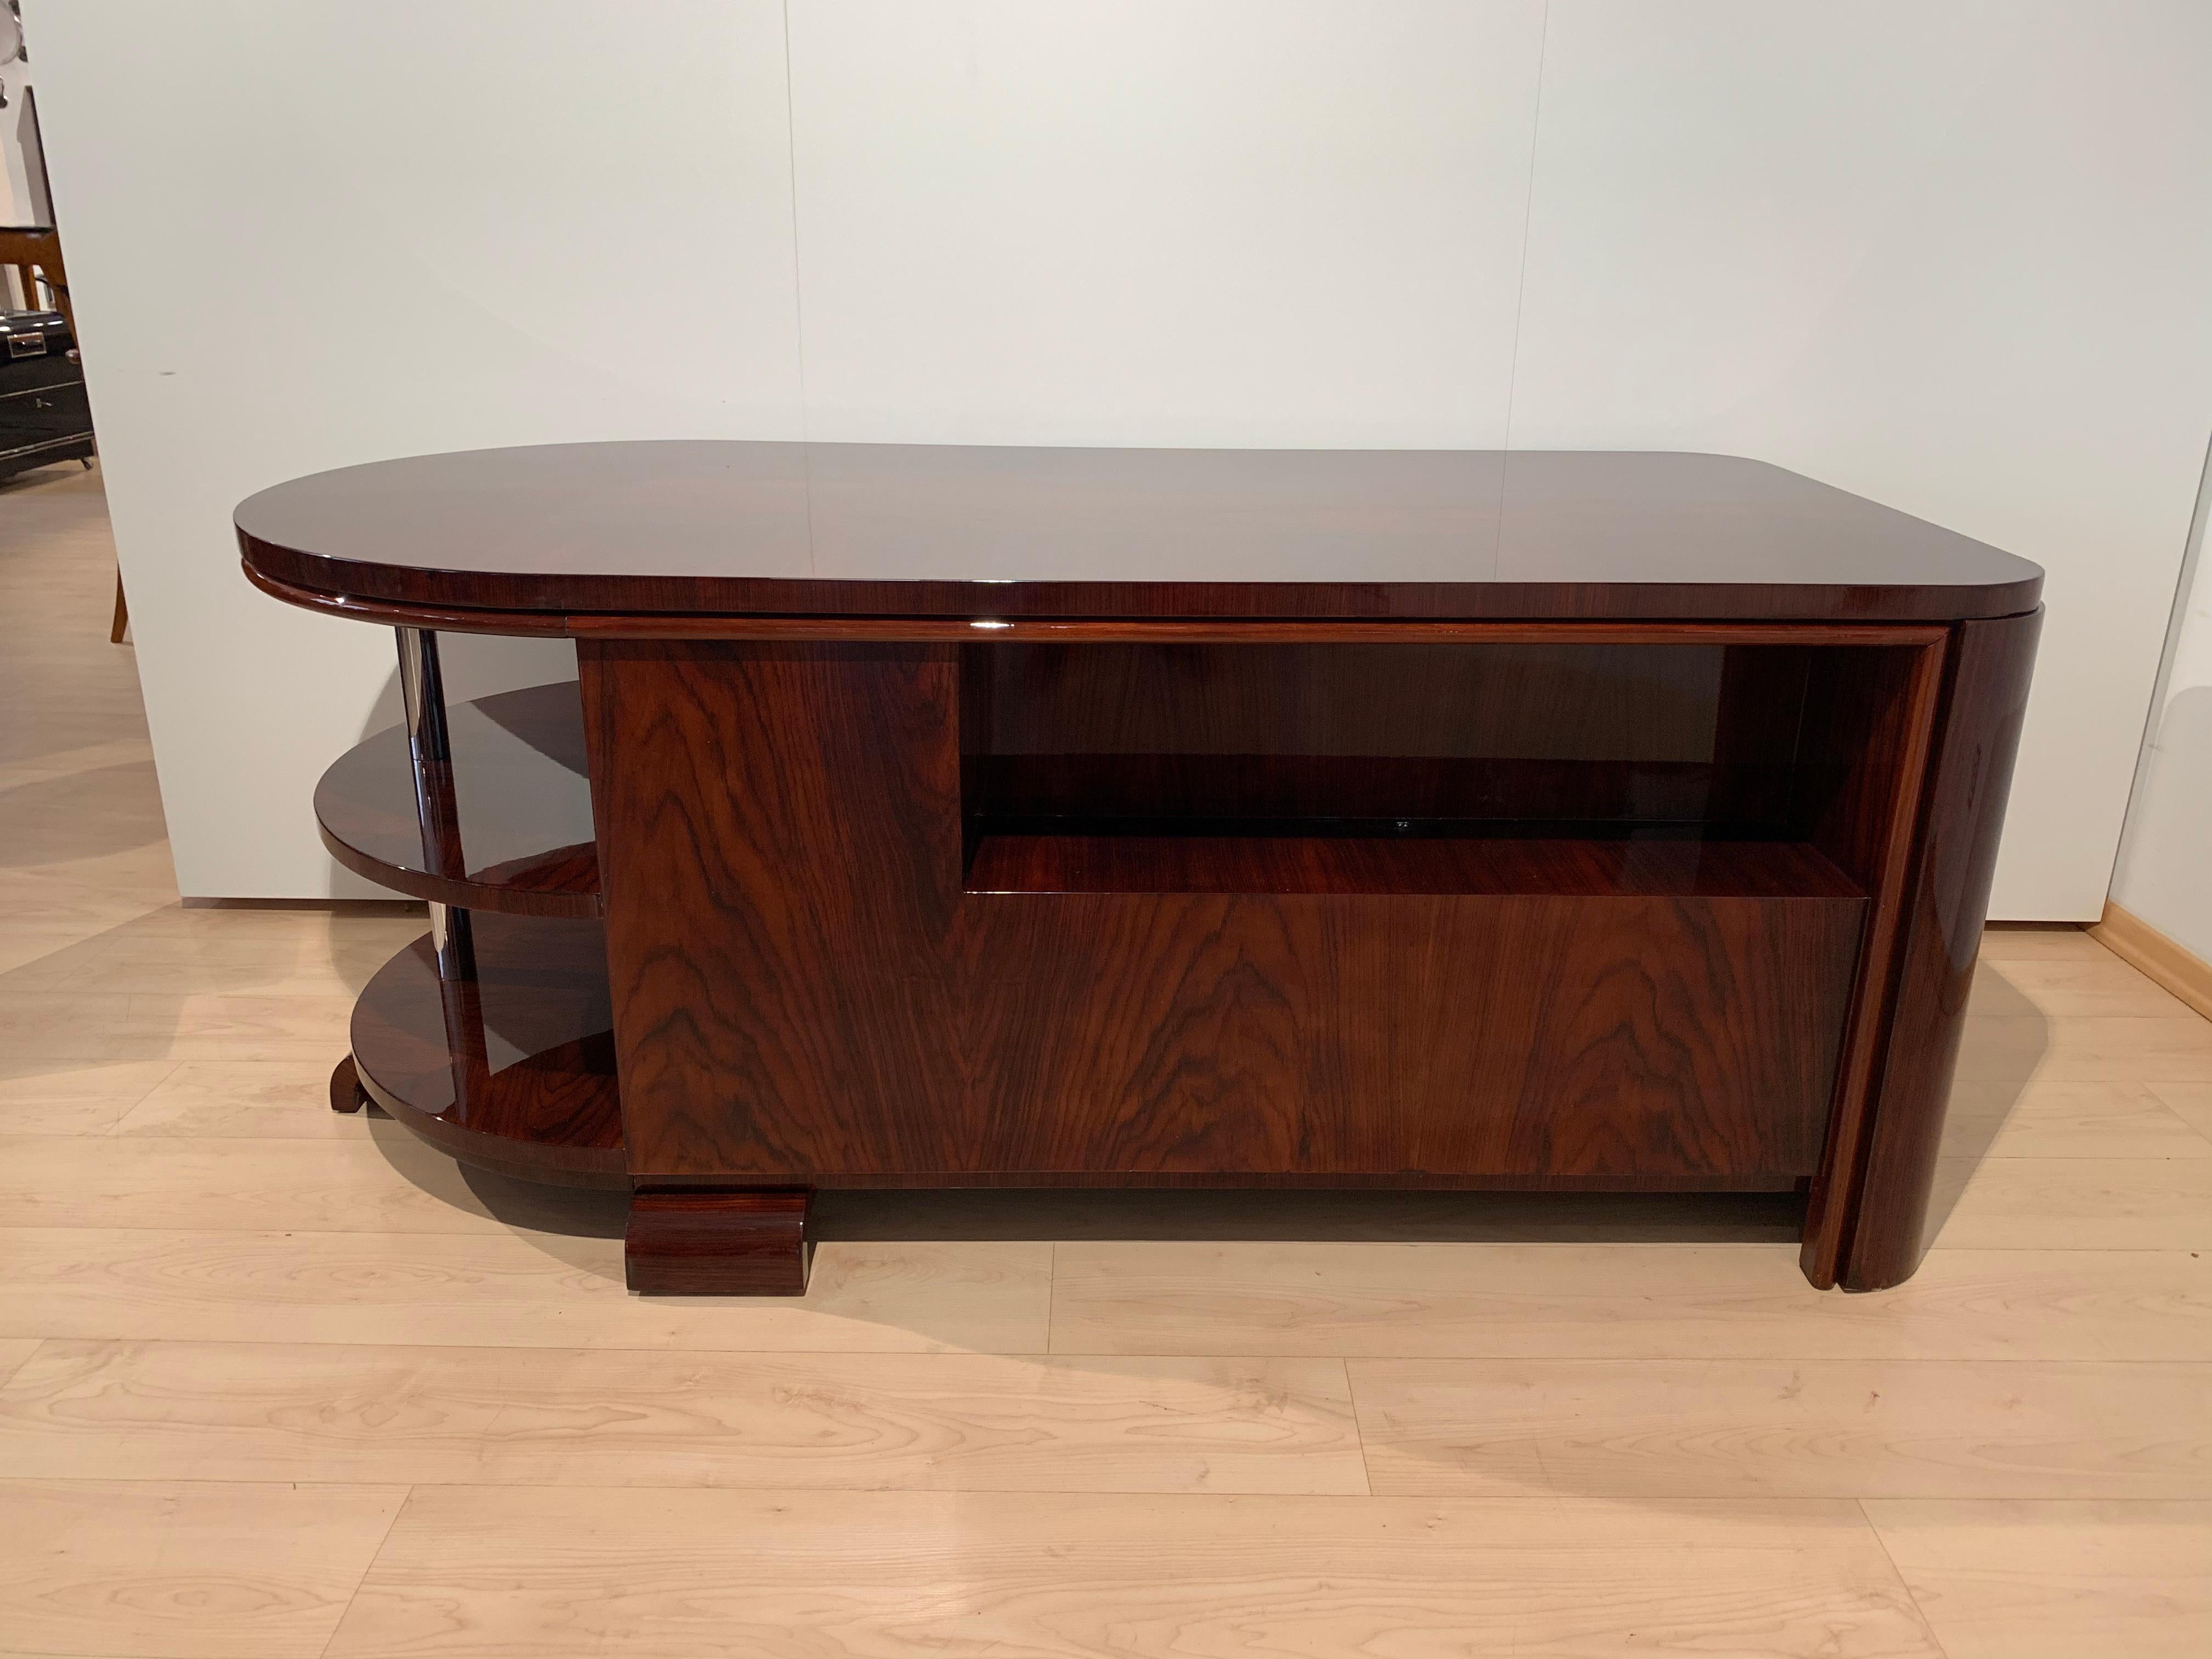 Art Deco Desk with Leather Chair, Rosewood Veneer, France, 1930s For Sale 2